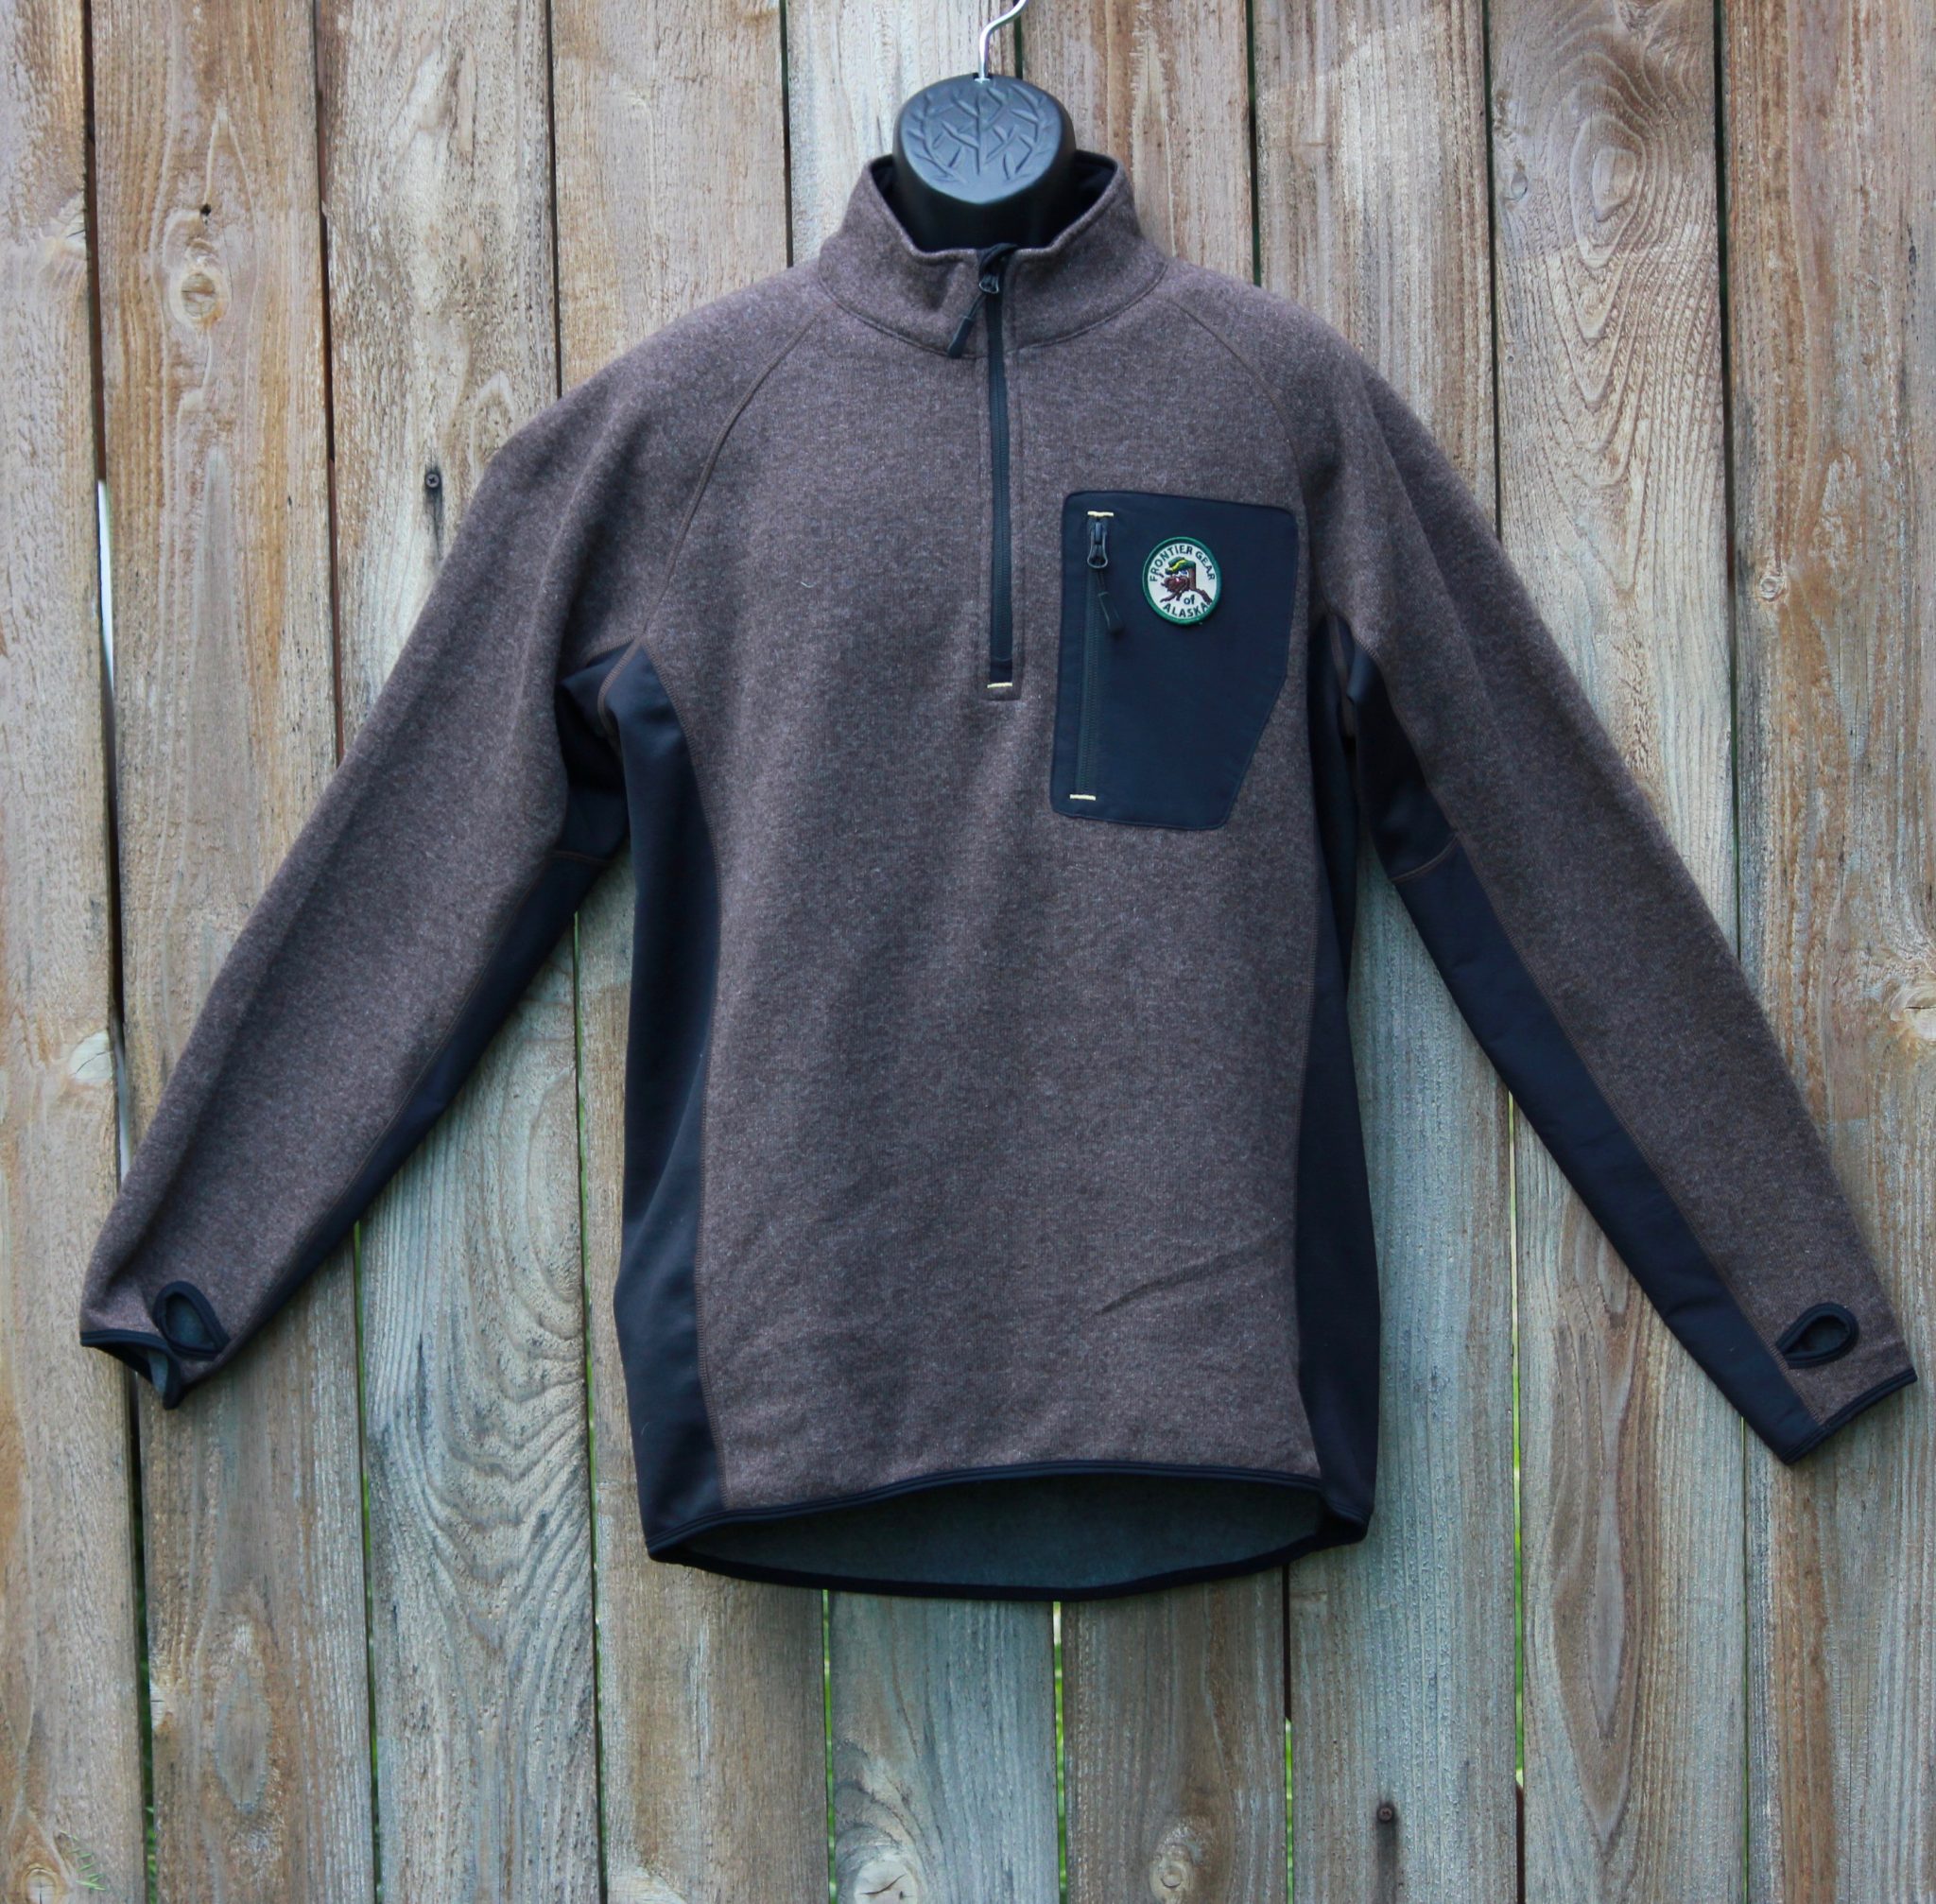 Wooly Mammoth Pullover - Brown